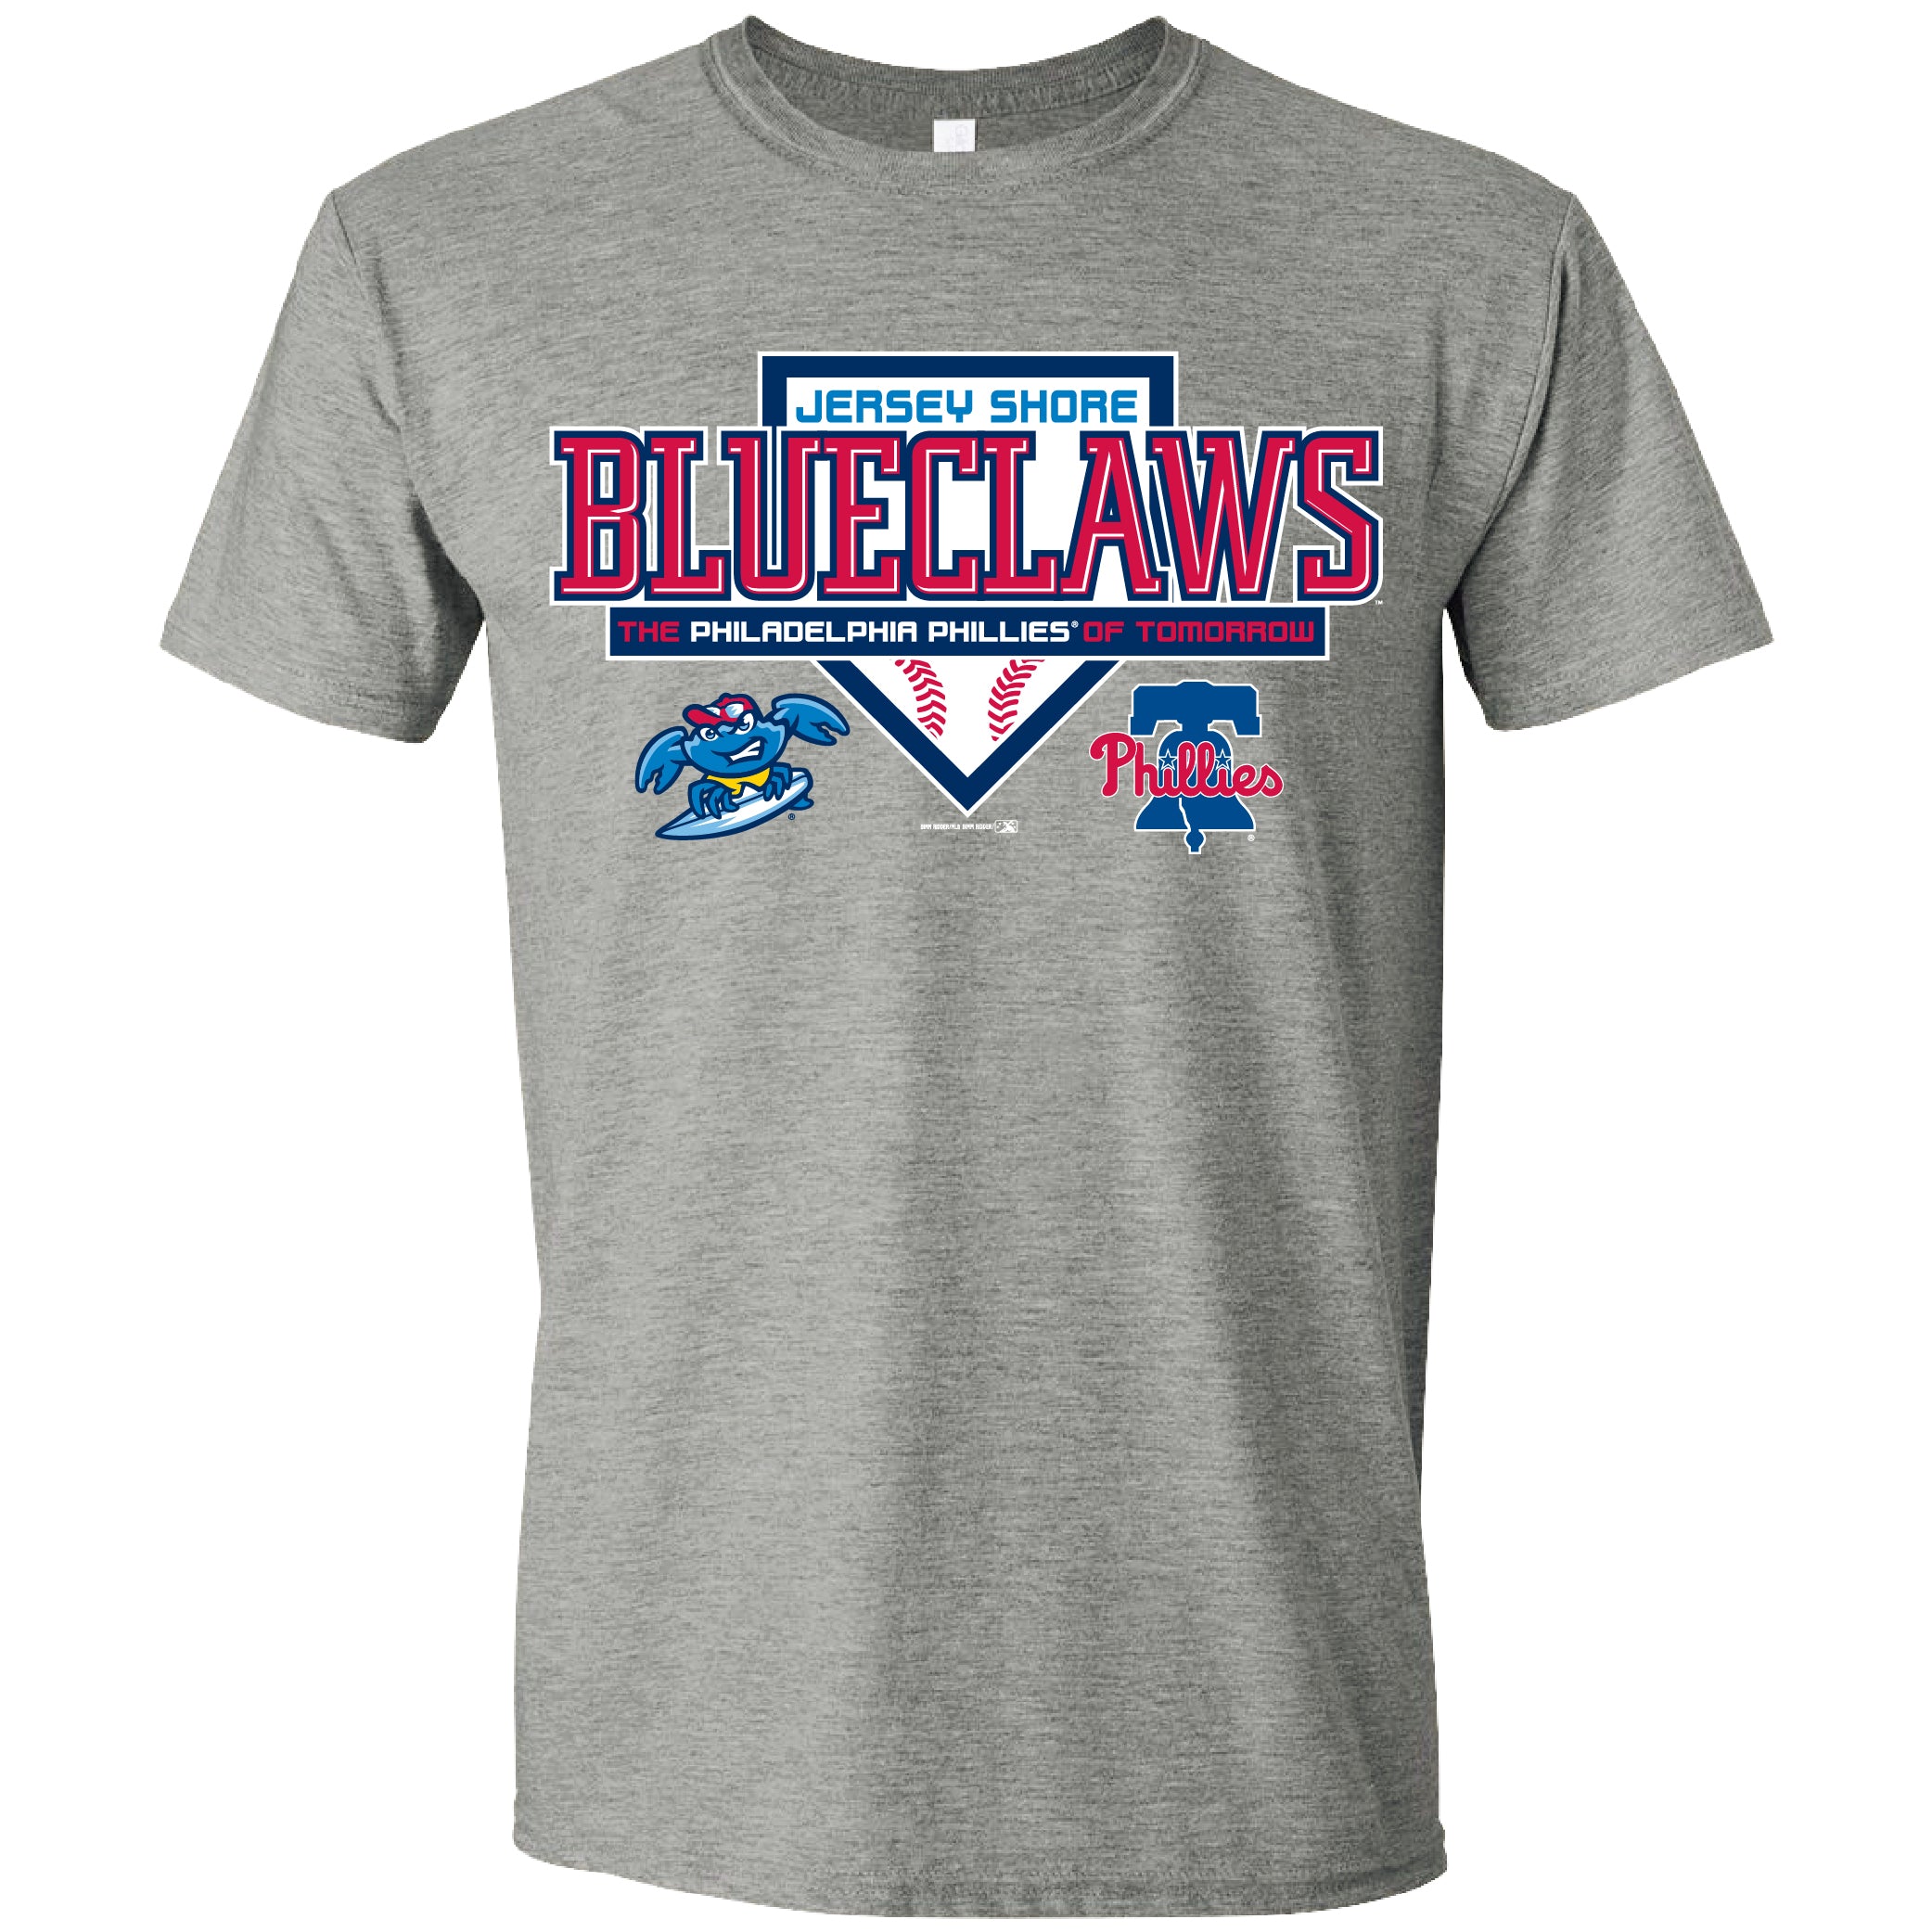 Jersey Shore BlueClaws 